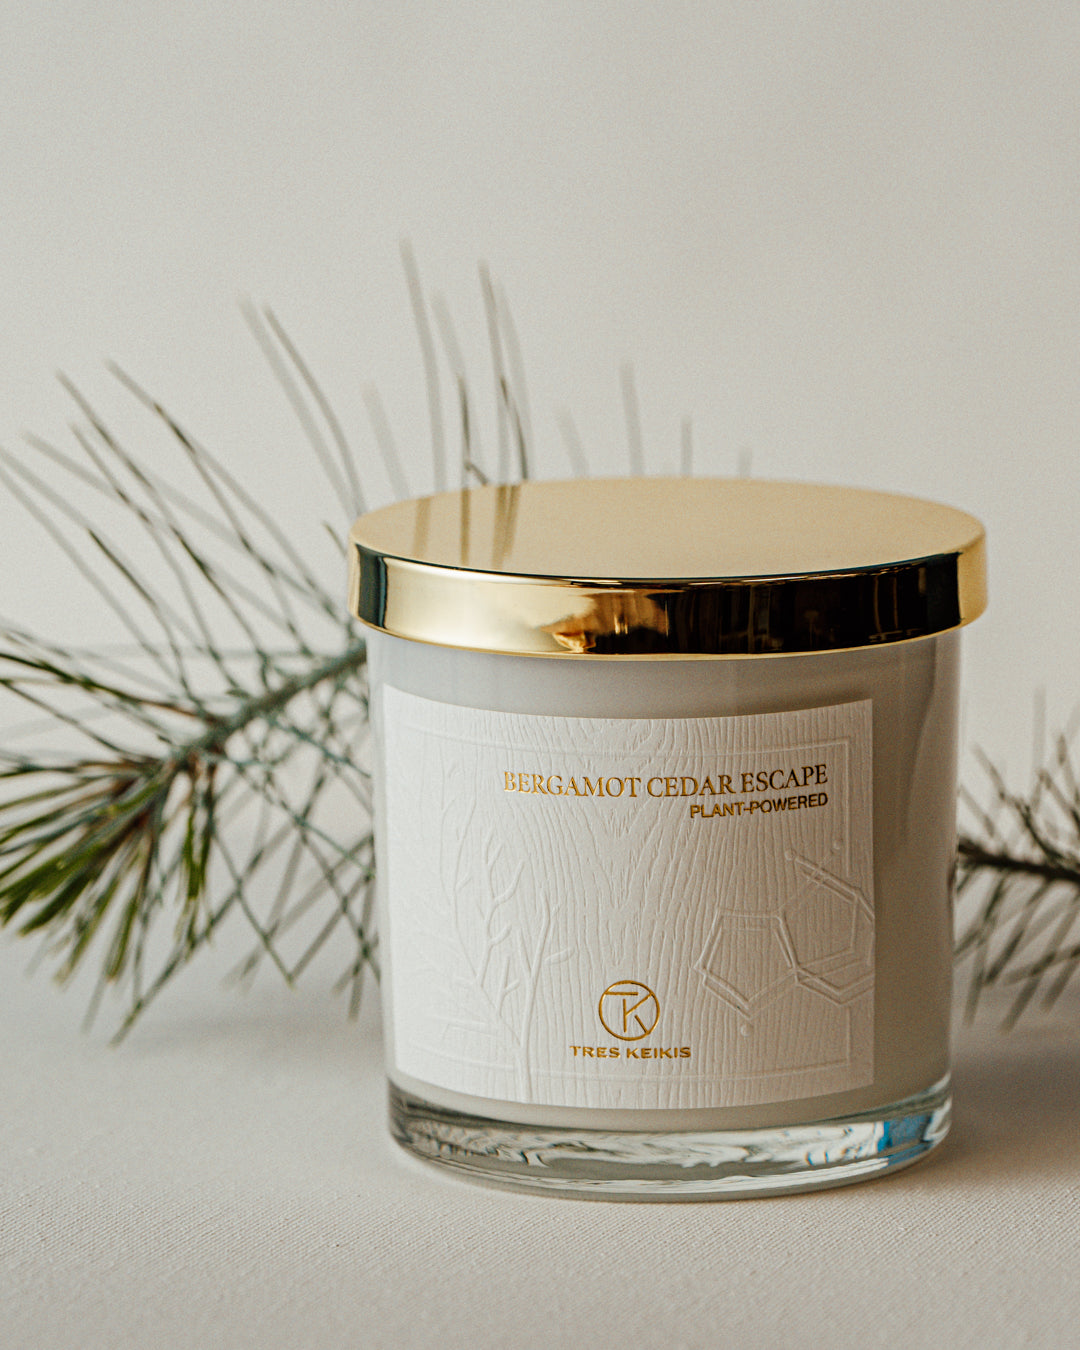 A candle in a clear glass jar with shiny gold lid and a wood-textured white label with embossed plant and molecule art. The words Bergamot Cedar escape and Tres Keikis logo are printed in gold foil. The jar is on a continuous white backdrop with a decorative green pine needle branch behind it.